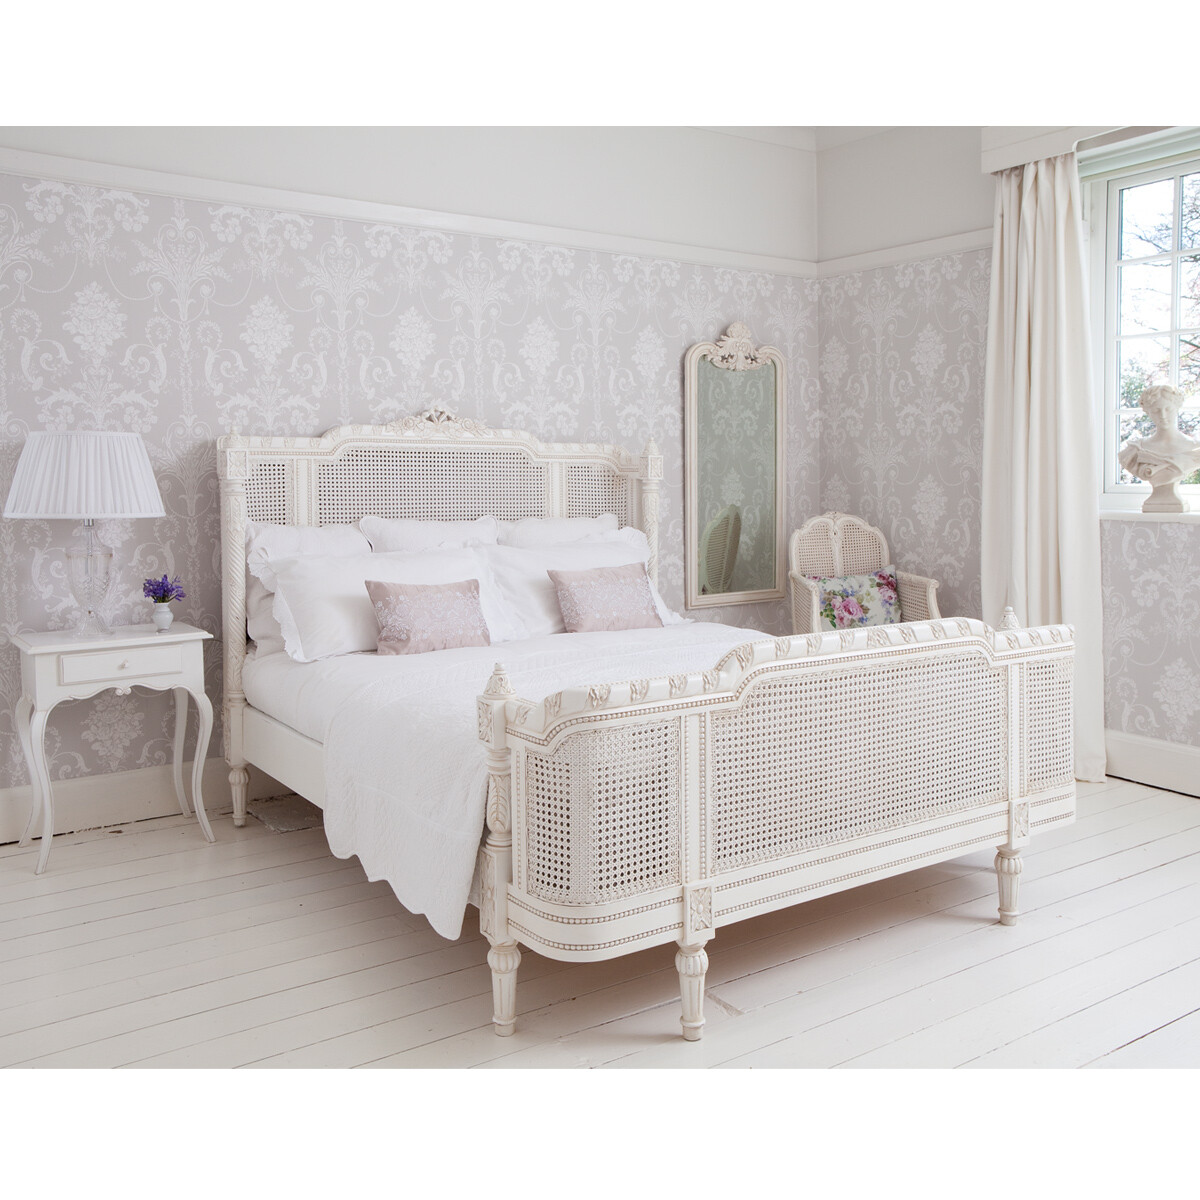 French beds - Provencal Lit Lit White - The French Bedroom Company - www.homeworlddesign.com